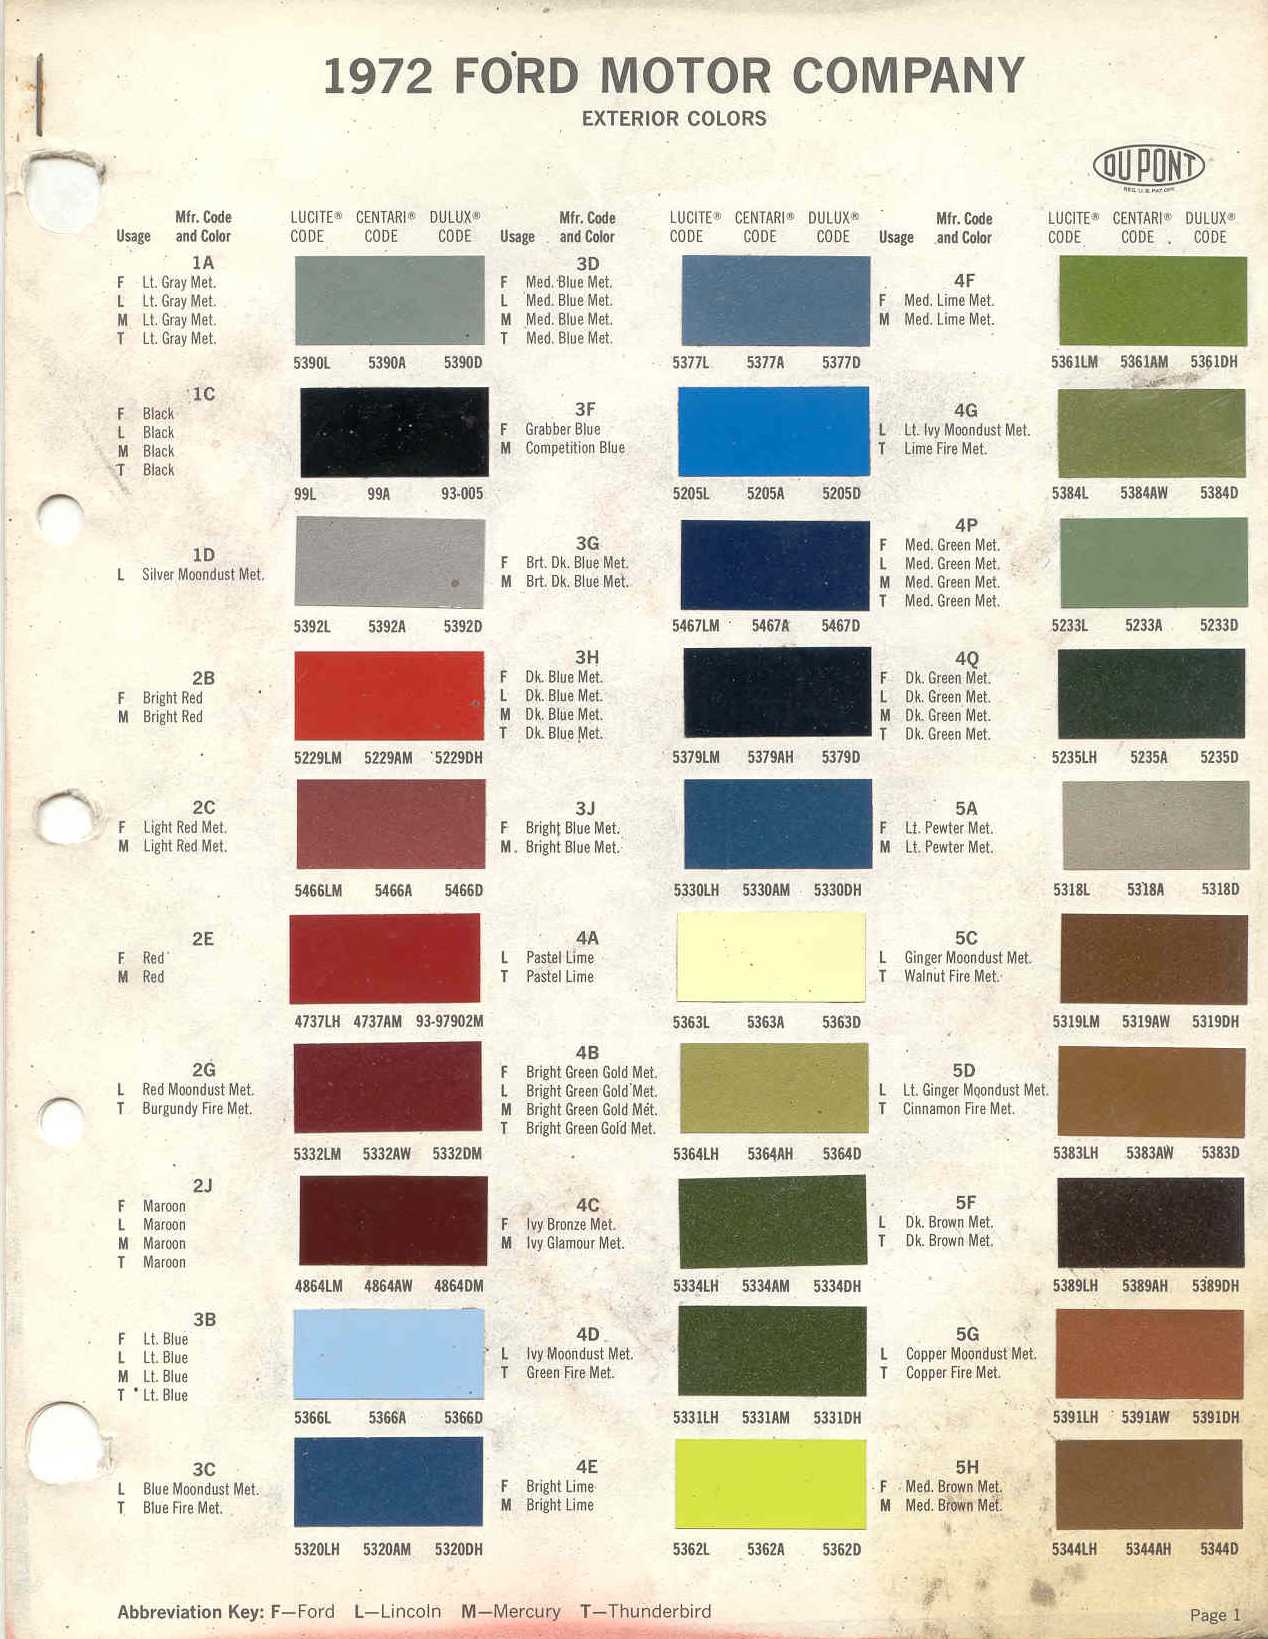 1970 Ford torino paint colors #5